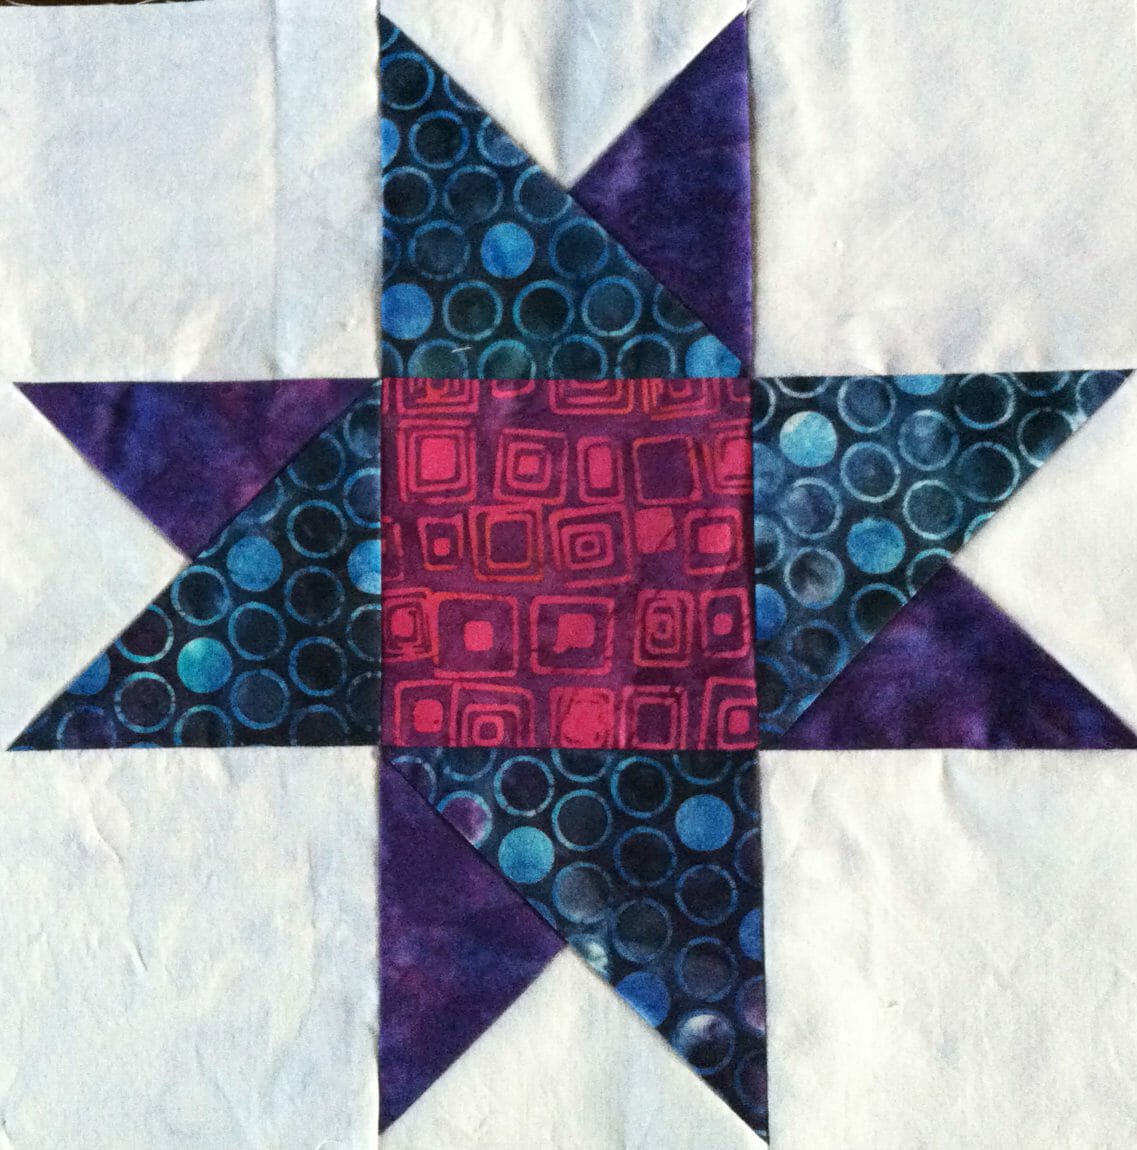 block of the month, free quilt pattern